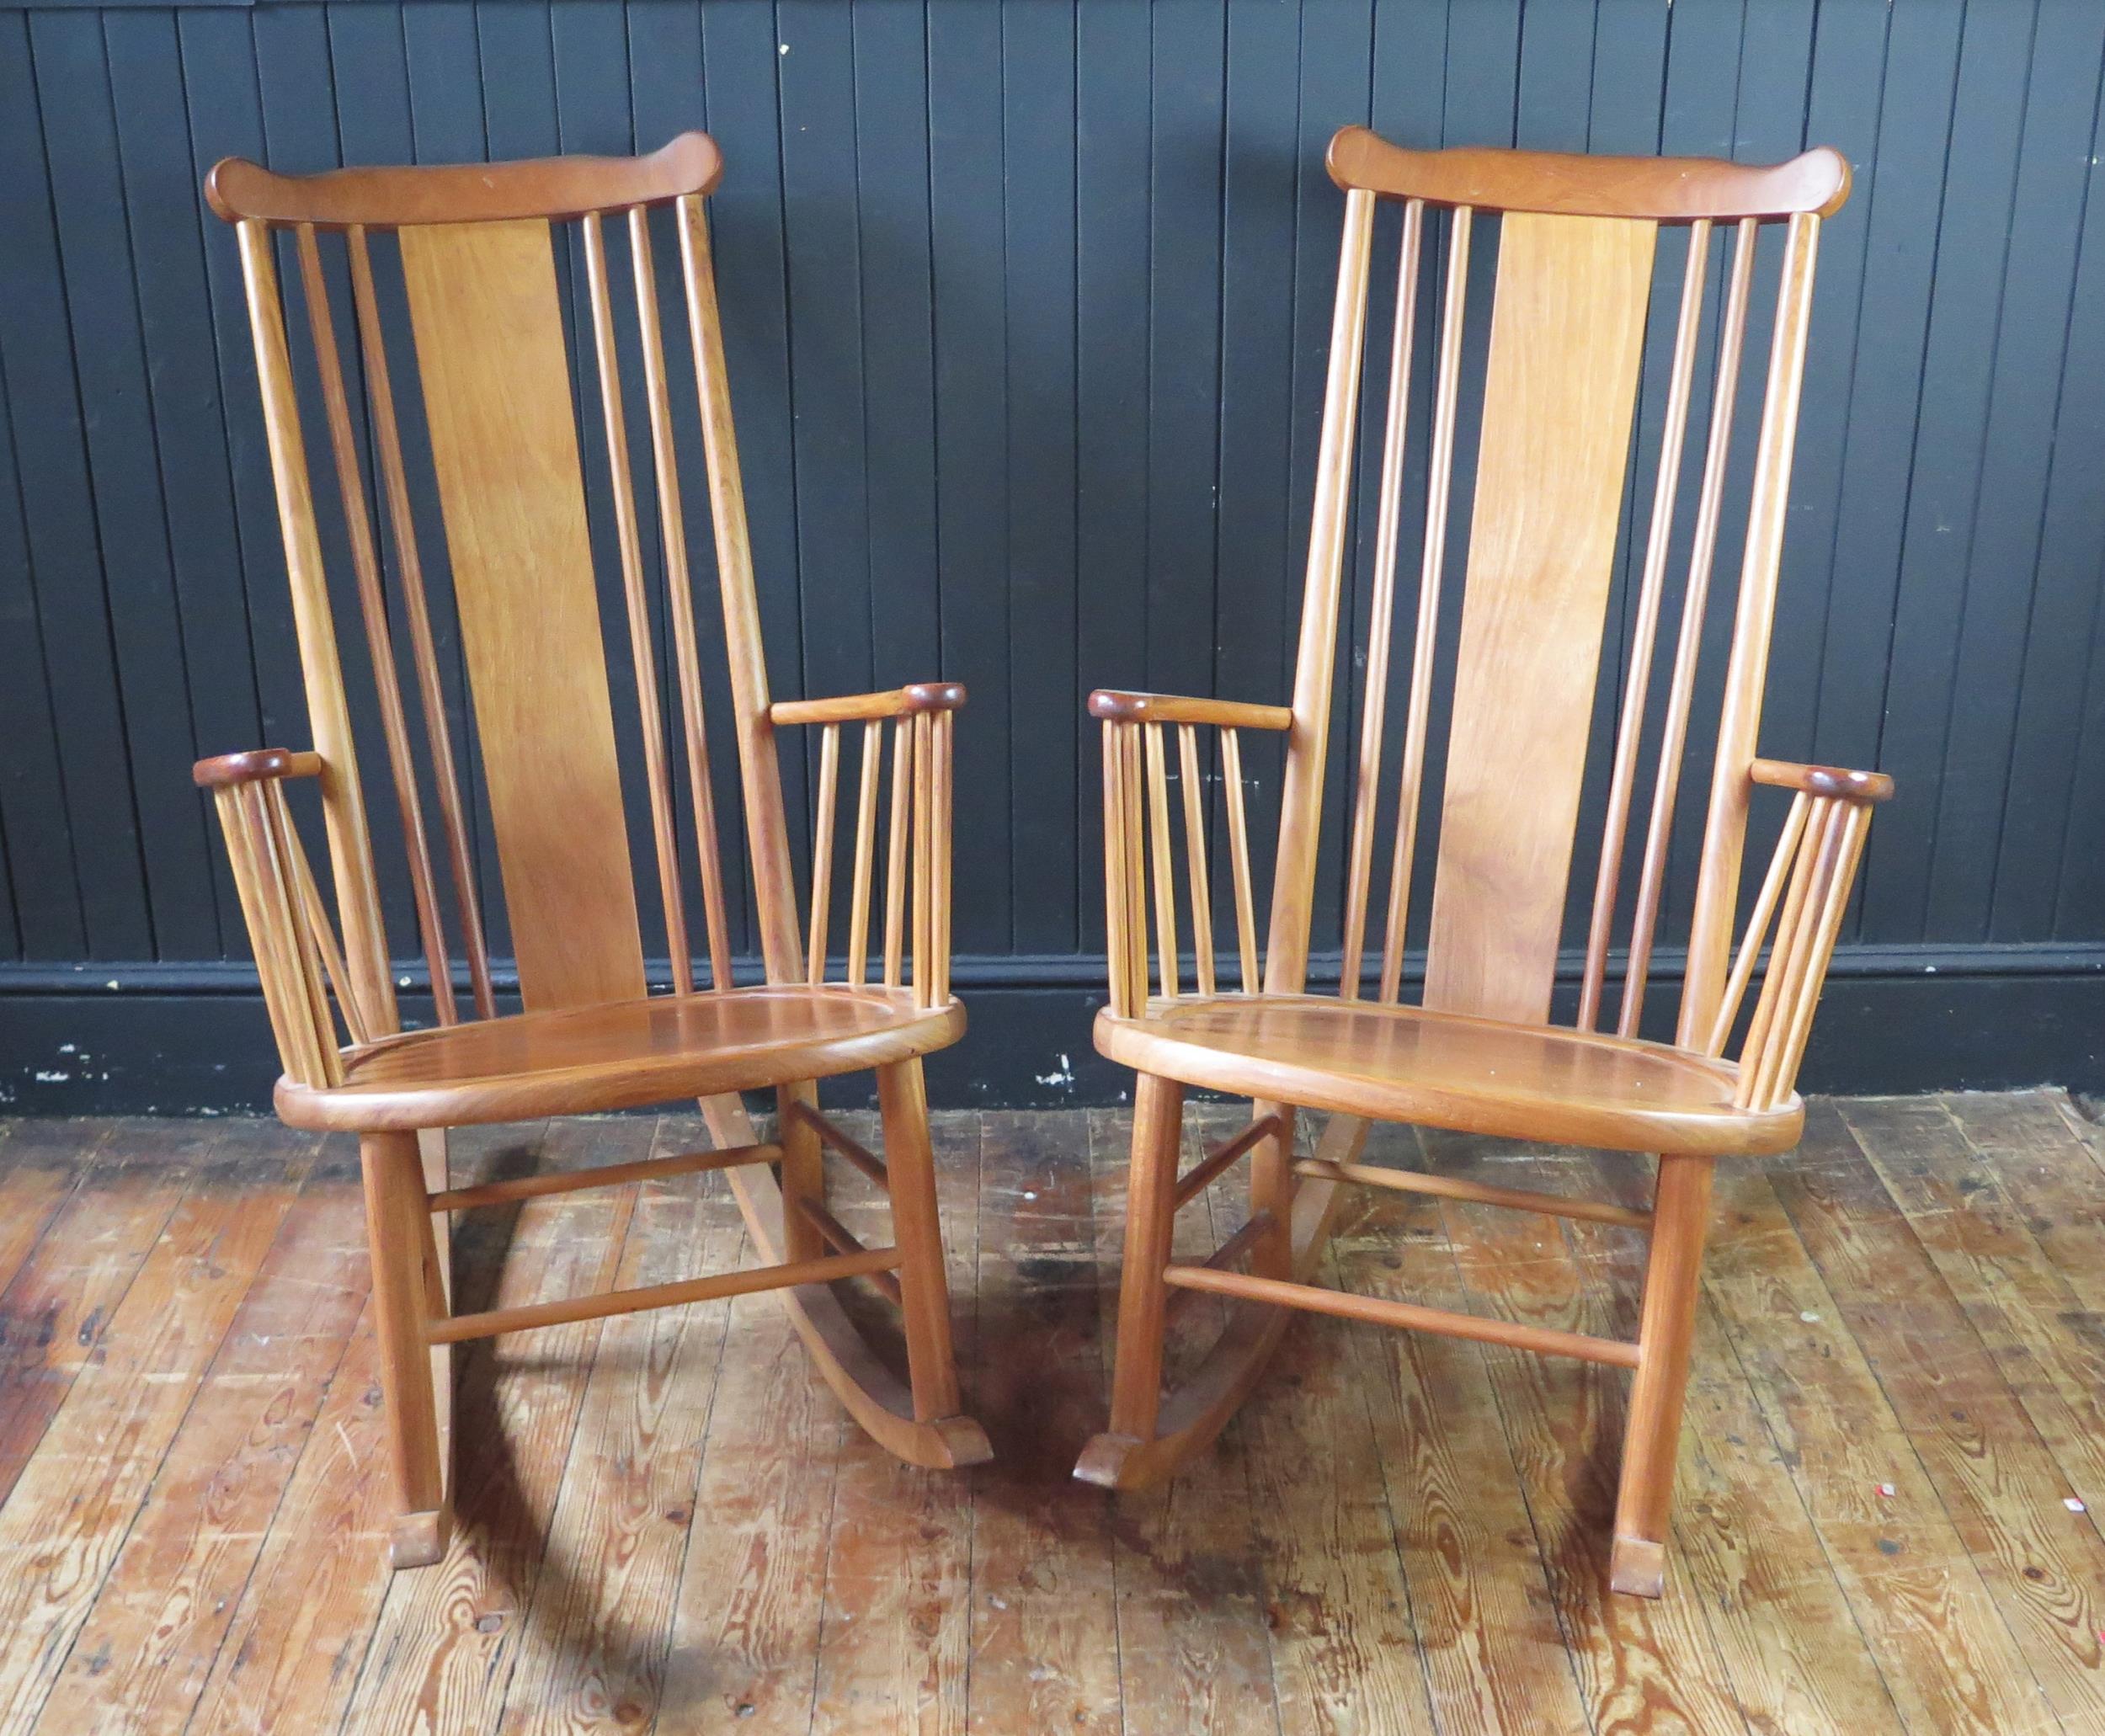 A pair of teak rocking chairs with solid central splat and spindle back with solid seat on rocker